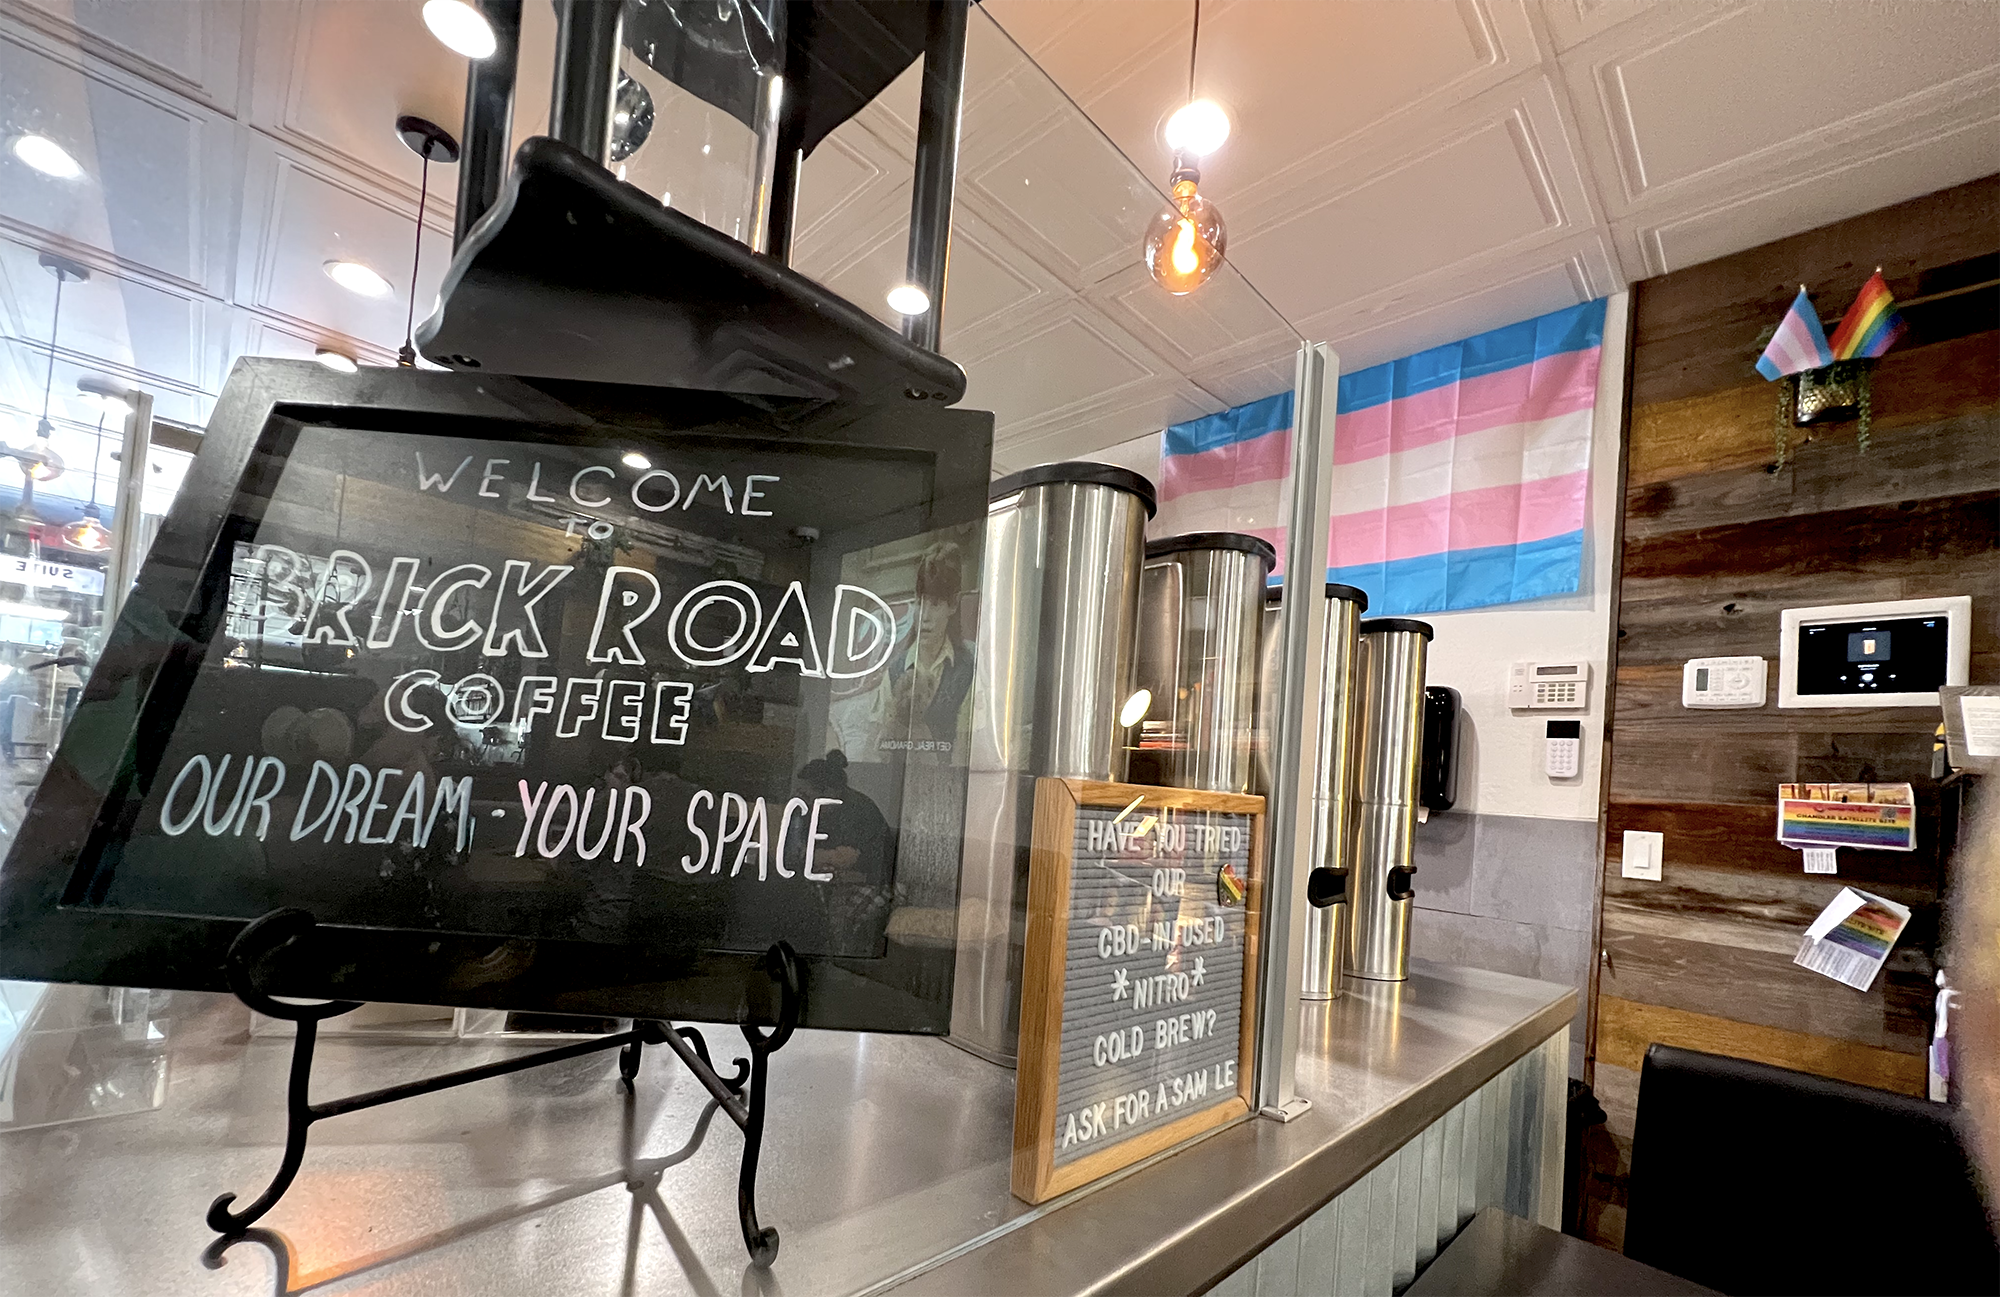 a small, black chalk sign reads 'Welcome to Brick Road Coffee, Our Dream, Your Space' It’s sitting on the counter of the coffee shop A blue, pink, and white trans flag is on the white wall behind the counter. A trans and pride flag can also be seen on a wooden shelf next to the larger flag. Some coffee making devices can be seen on the counter. Another sign reads have you tried our CBD infused nitro brew? Ask for a sample In the glass reflection on the counter, you can make out some people sitting around the shop as Golden Girls are projected to a wall behind the counter.